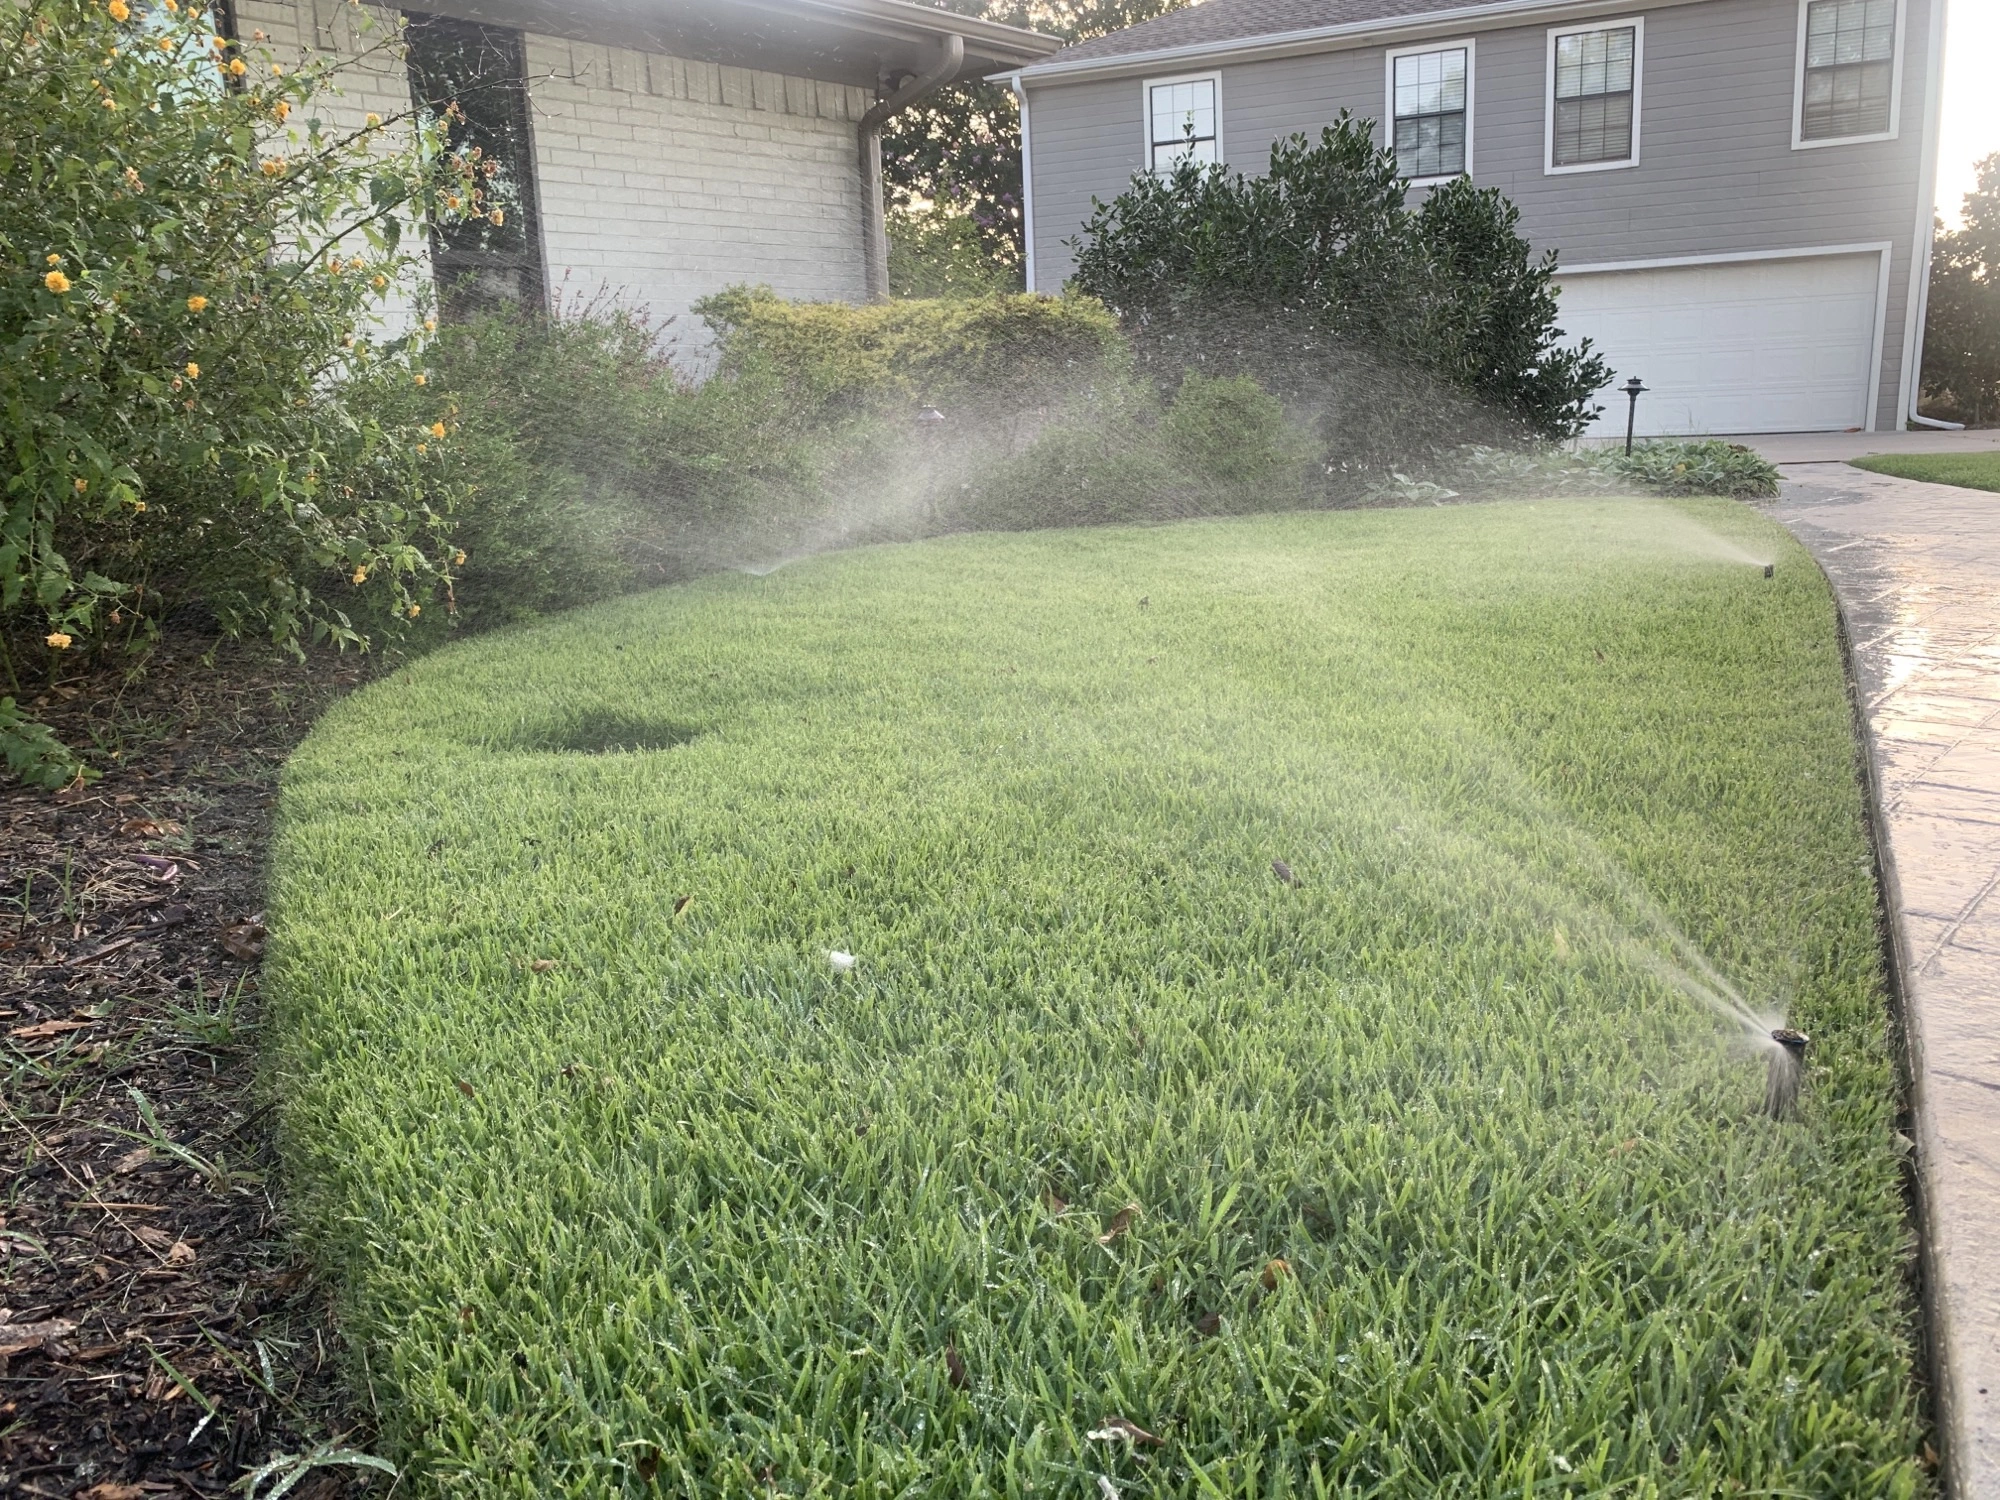 Will Fertilizer Kill My Grass? Debunking Common Myths about Lawn Fertilizer for Homeowners